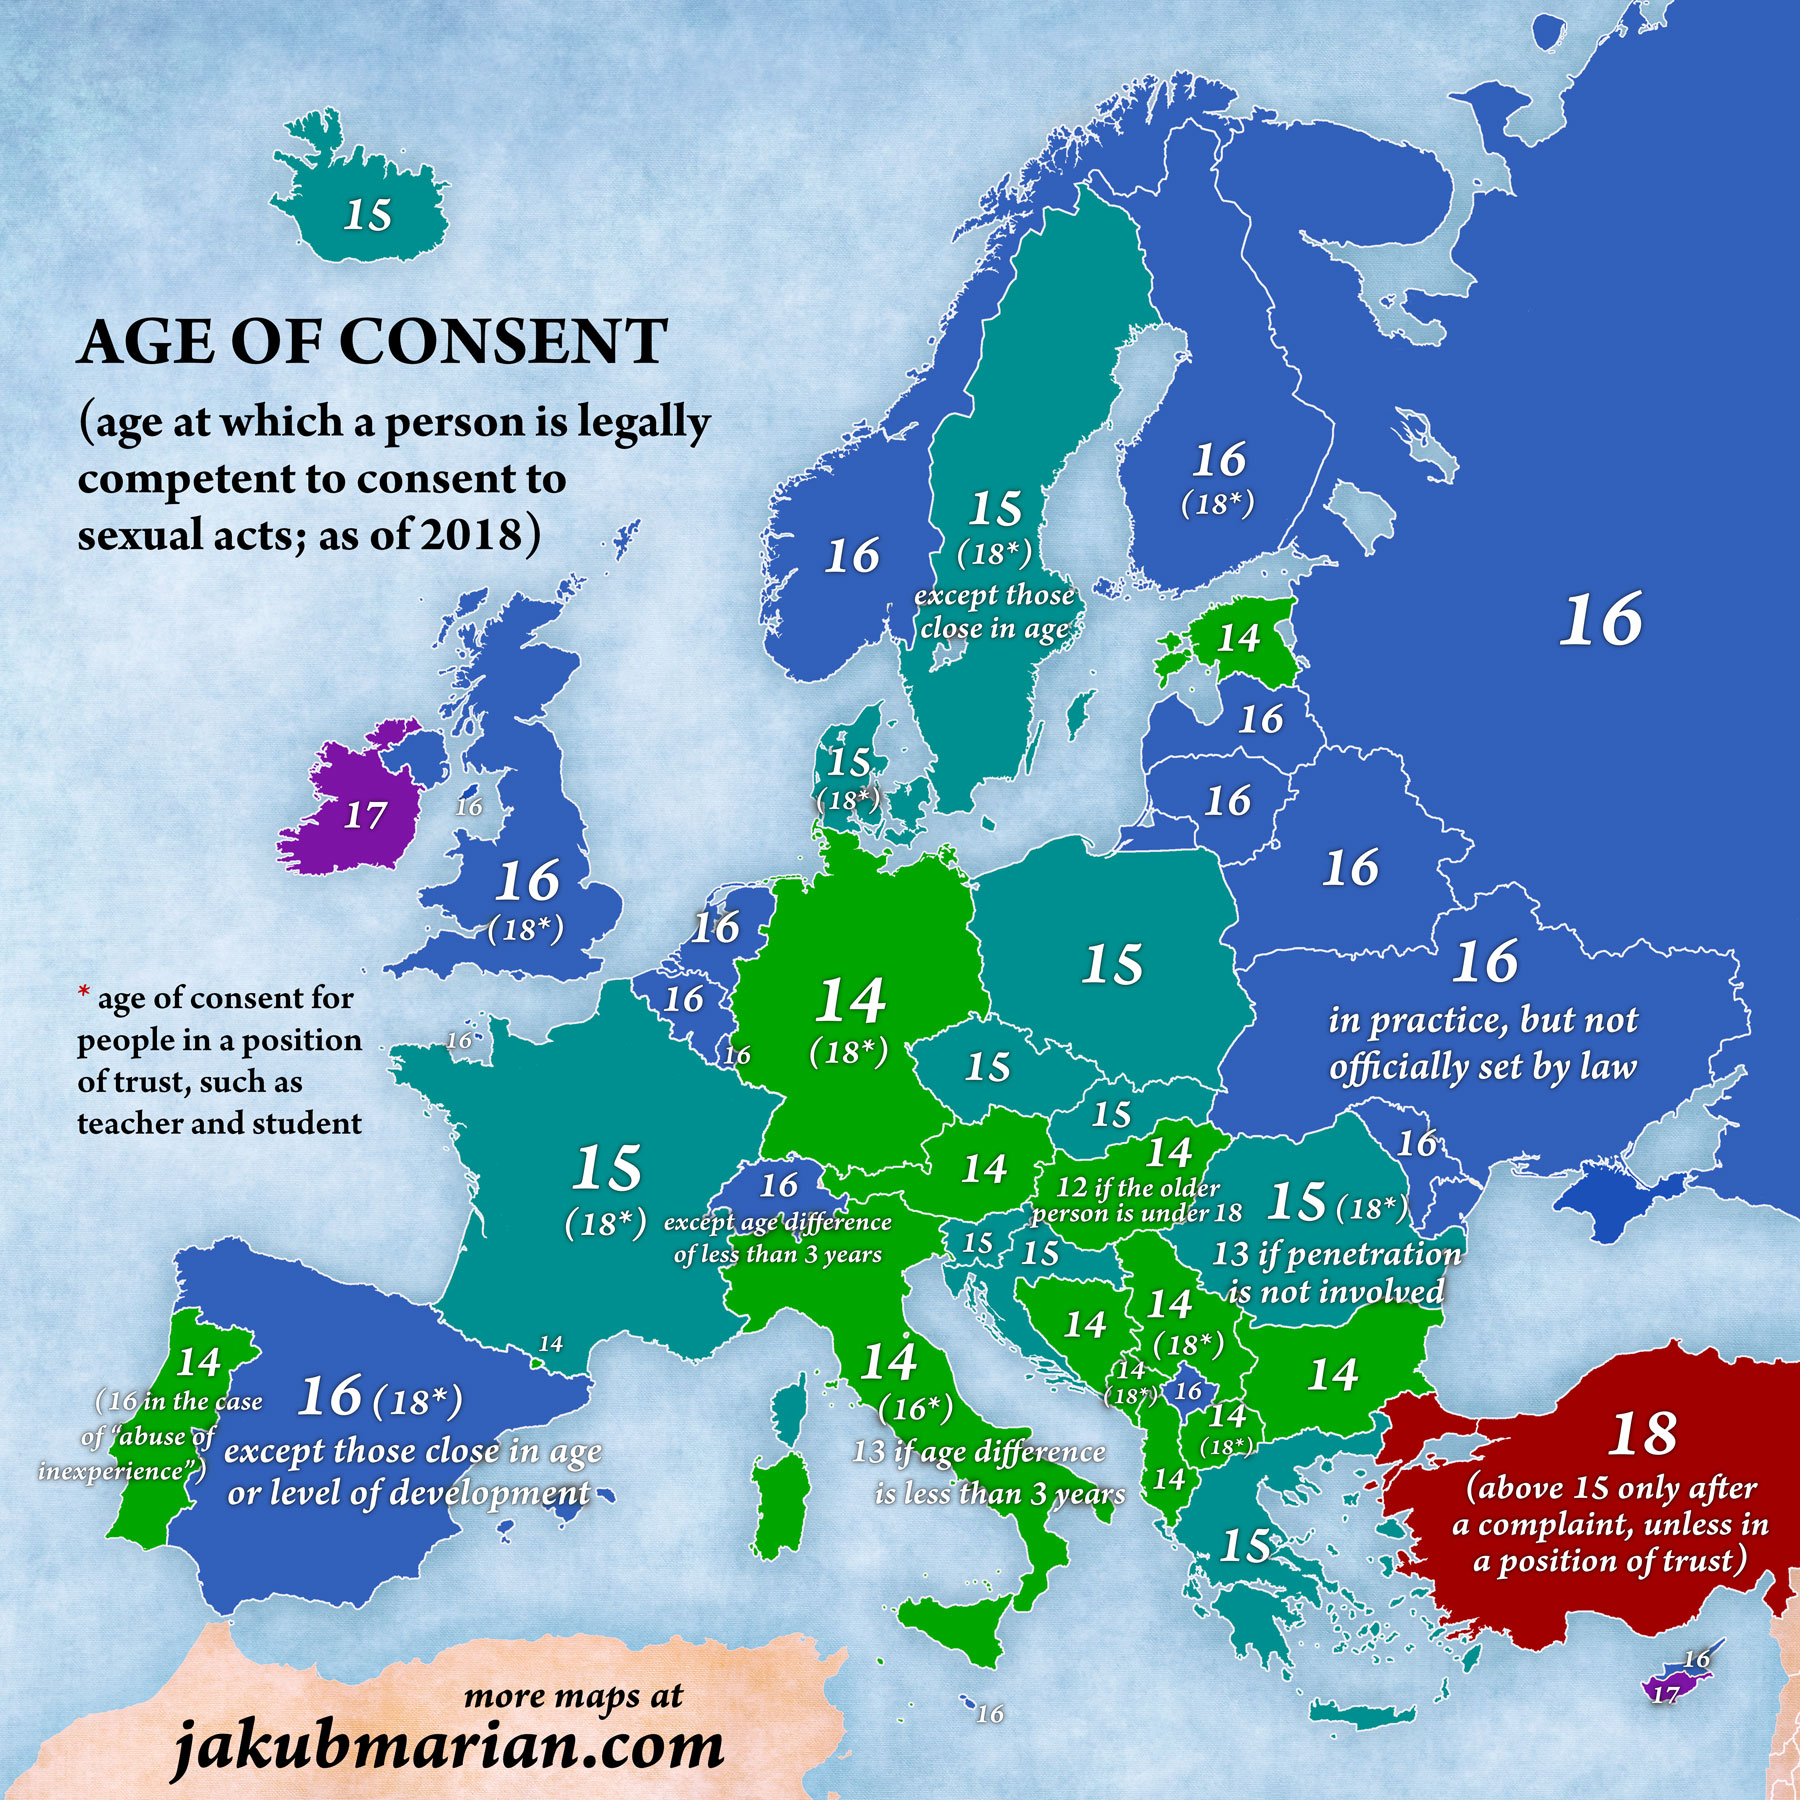 age-of-consent-europe.jpg